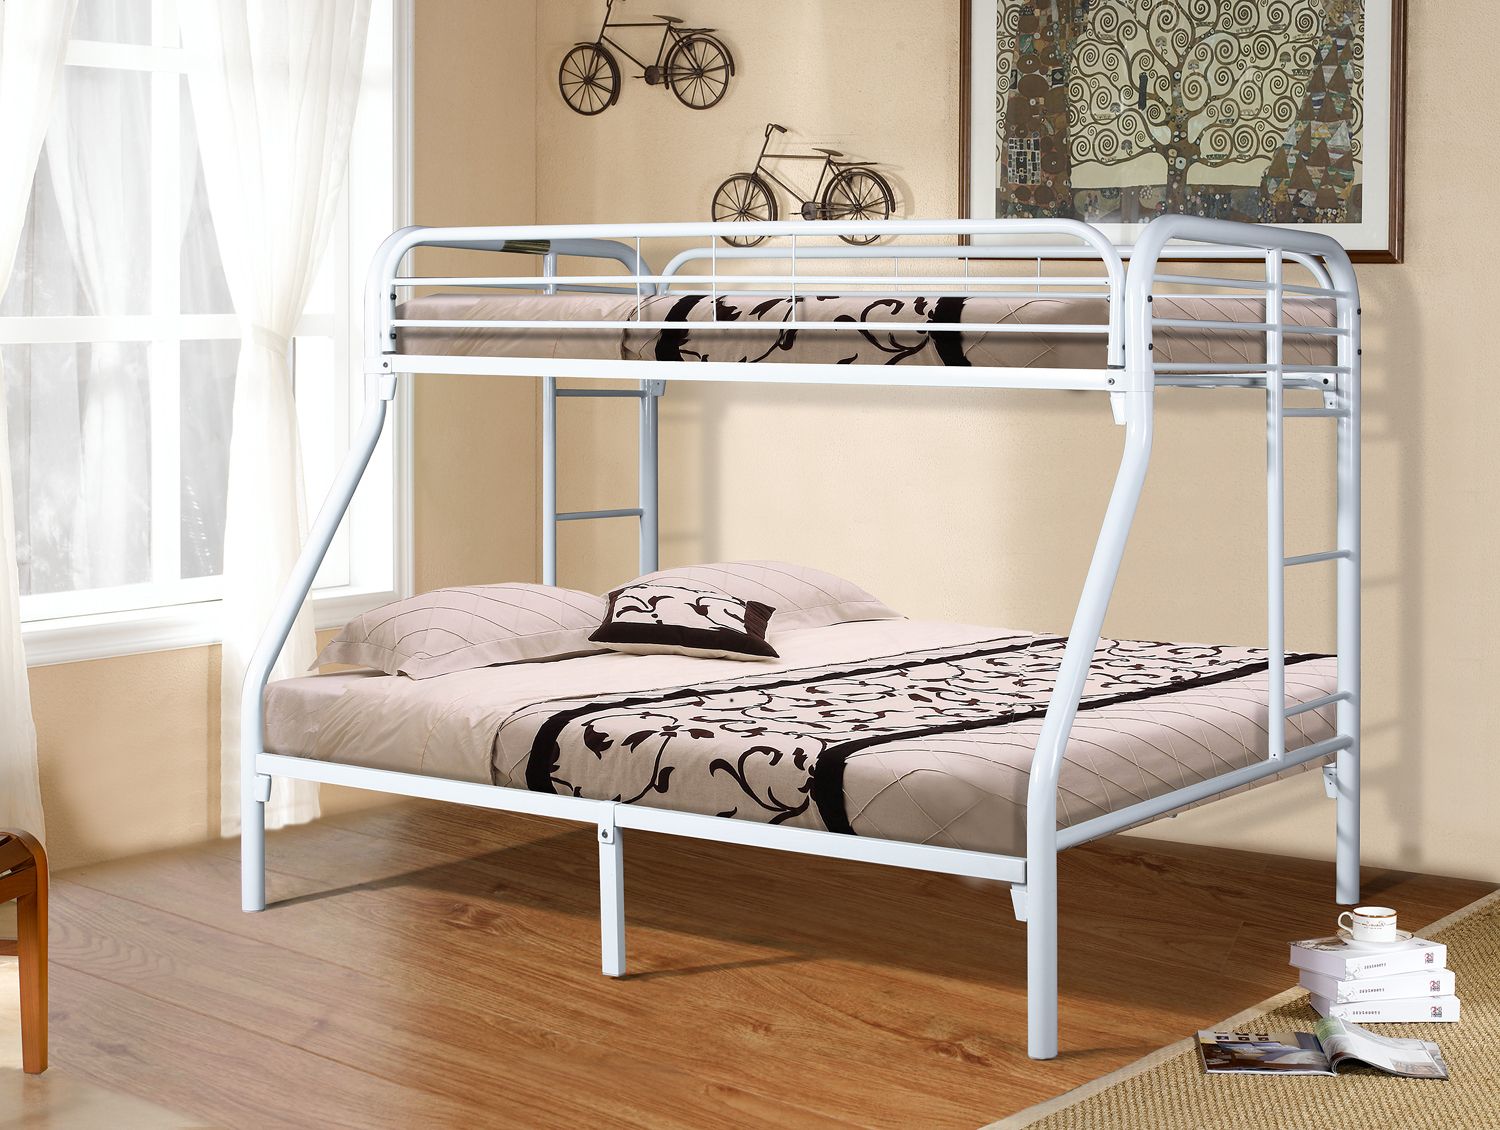 Donco Trading Company Twin over Full Bunk Bed